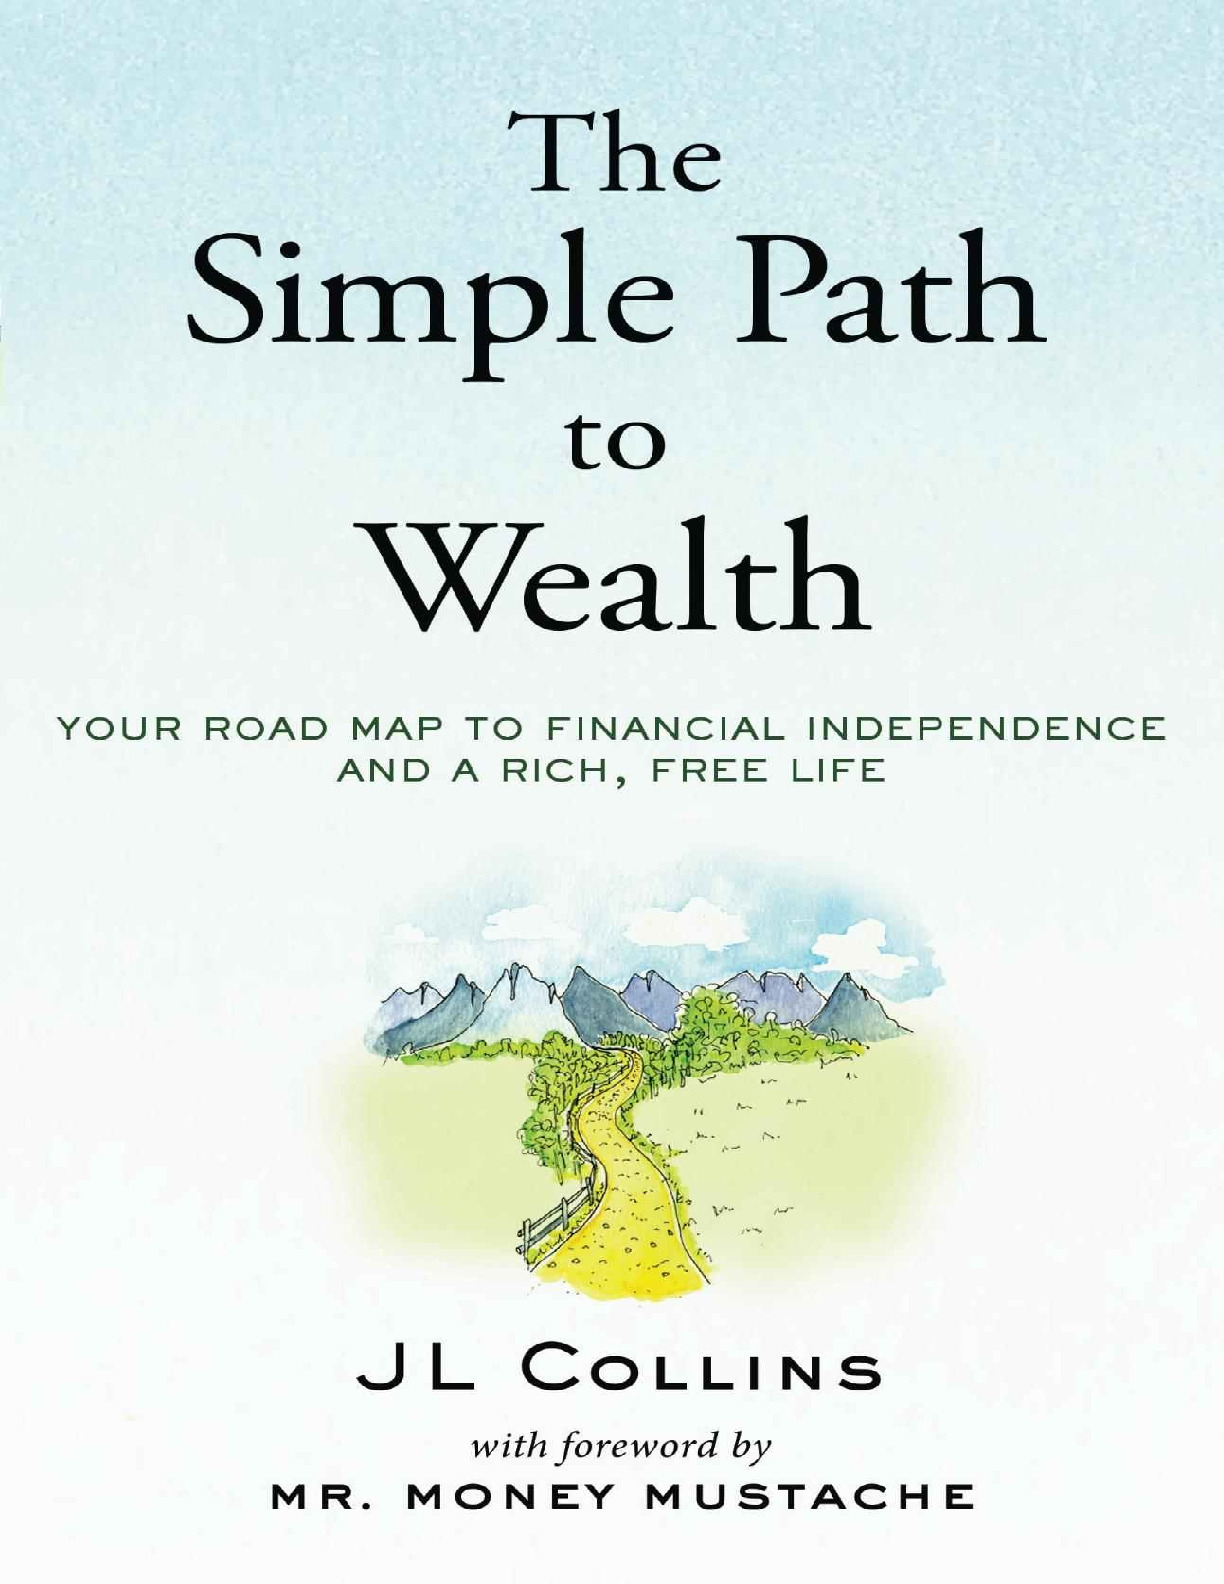 Your road map to financial independence and a rich, free life